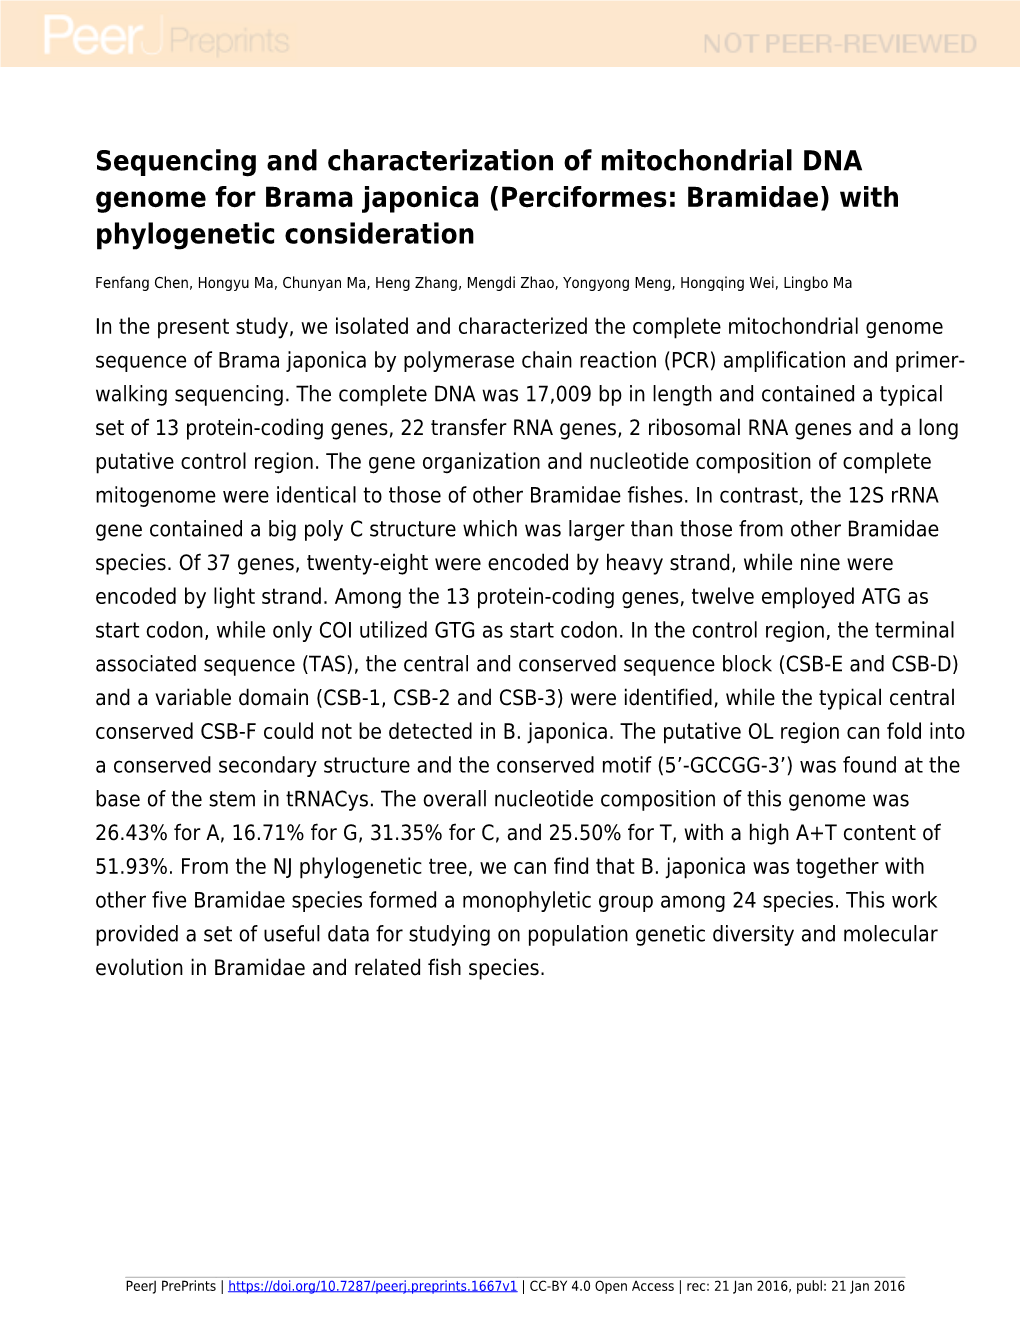 Sequencing and Characterization of Mitochondrial DNA Genome for Brama Japonica (Perciformes: Bramidae) with Phylogenetic Consideration